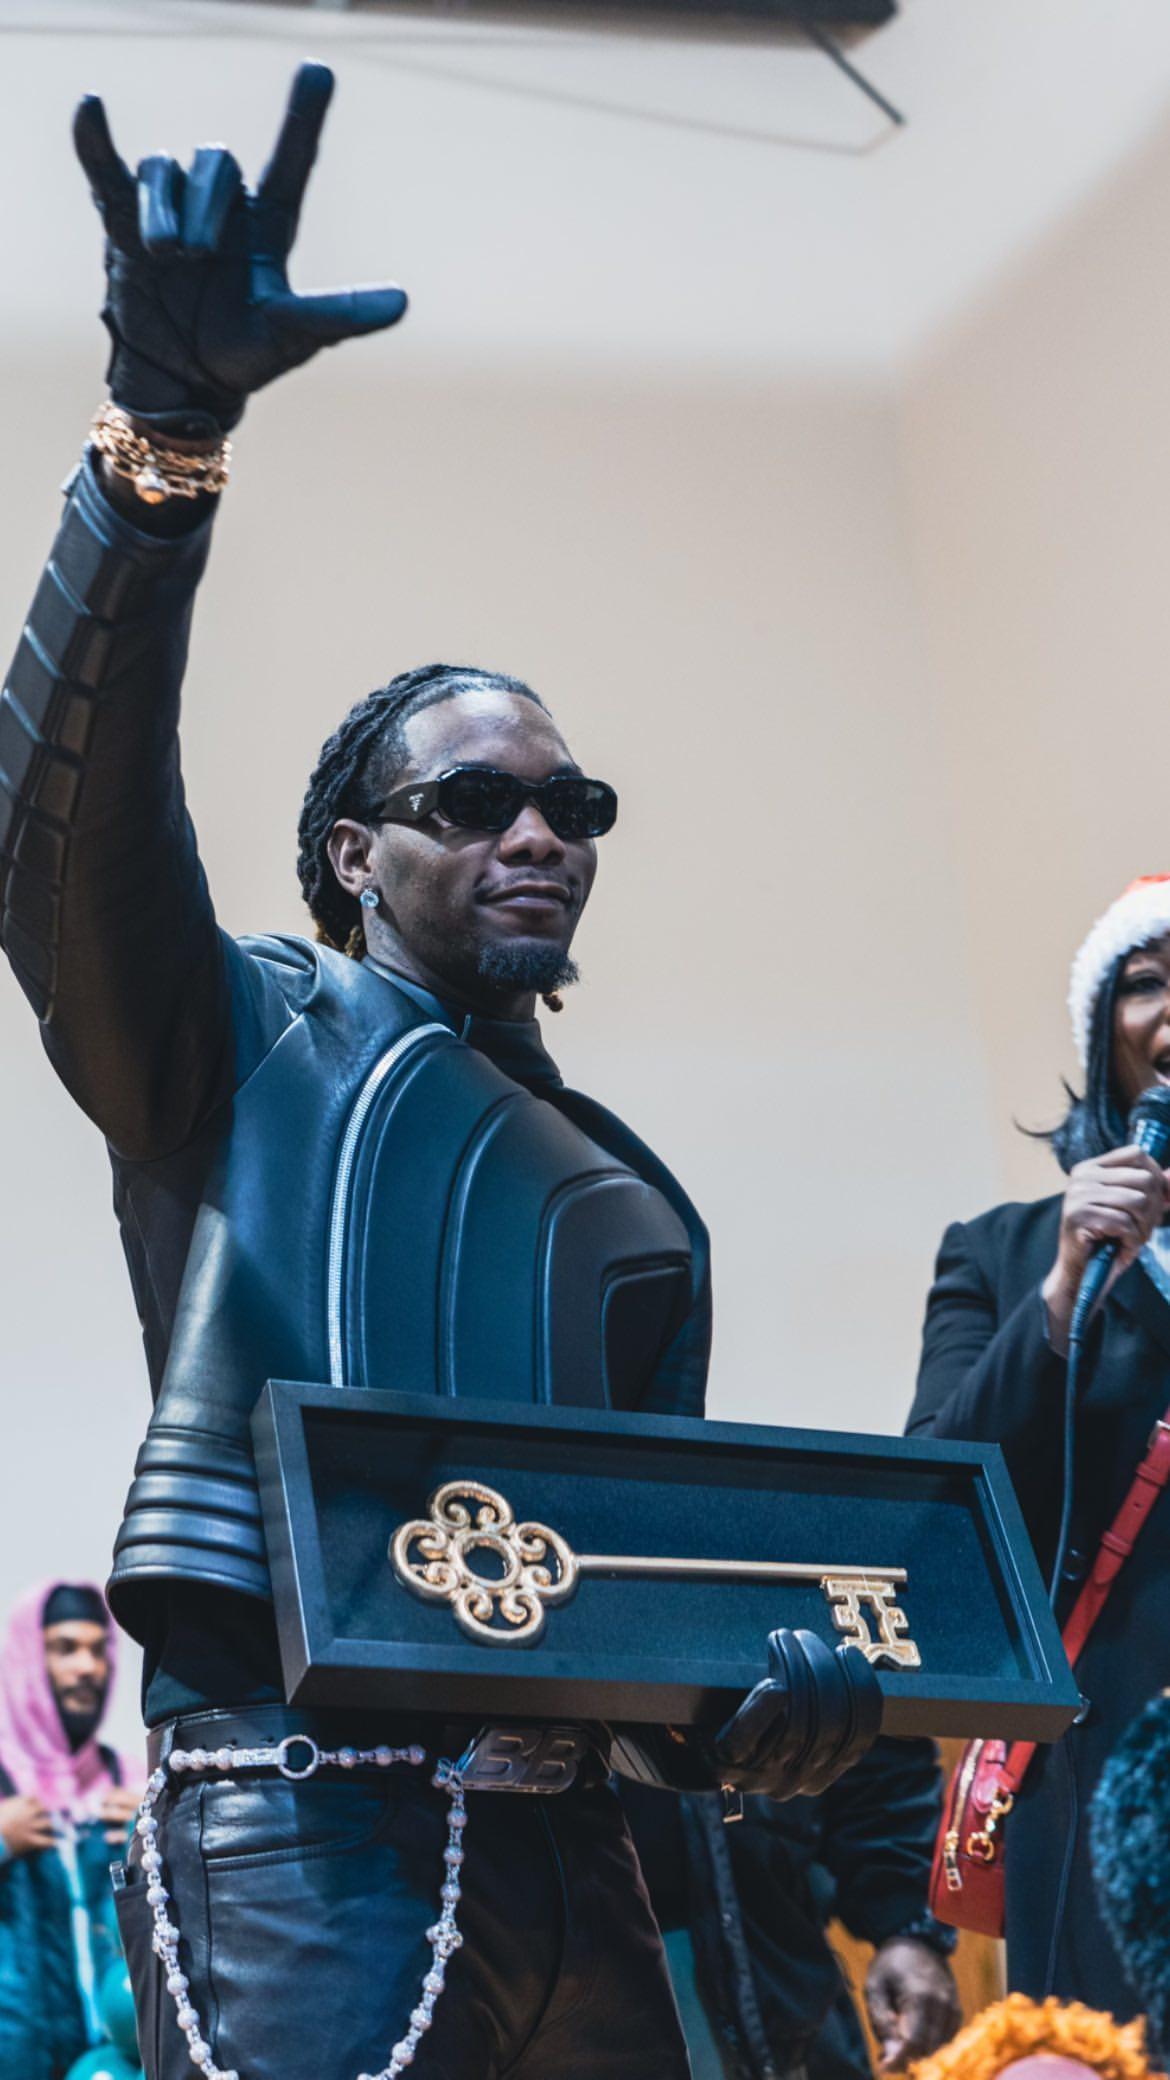 Offset gets key to the county in his hometown, Georgia